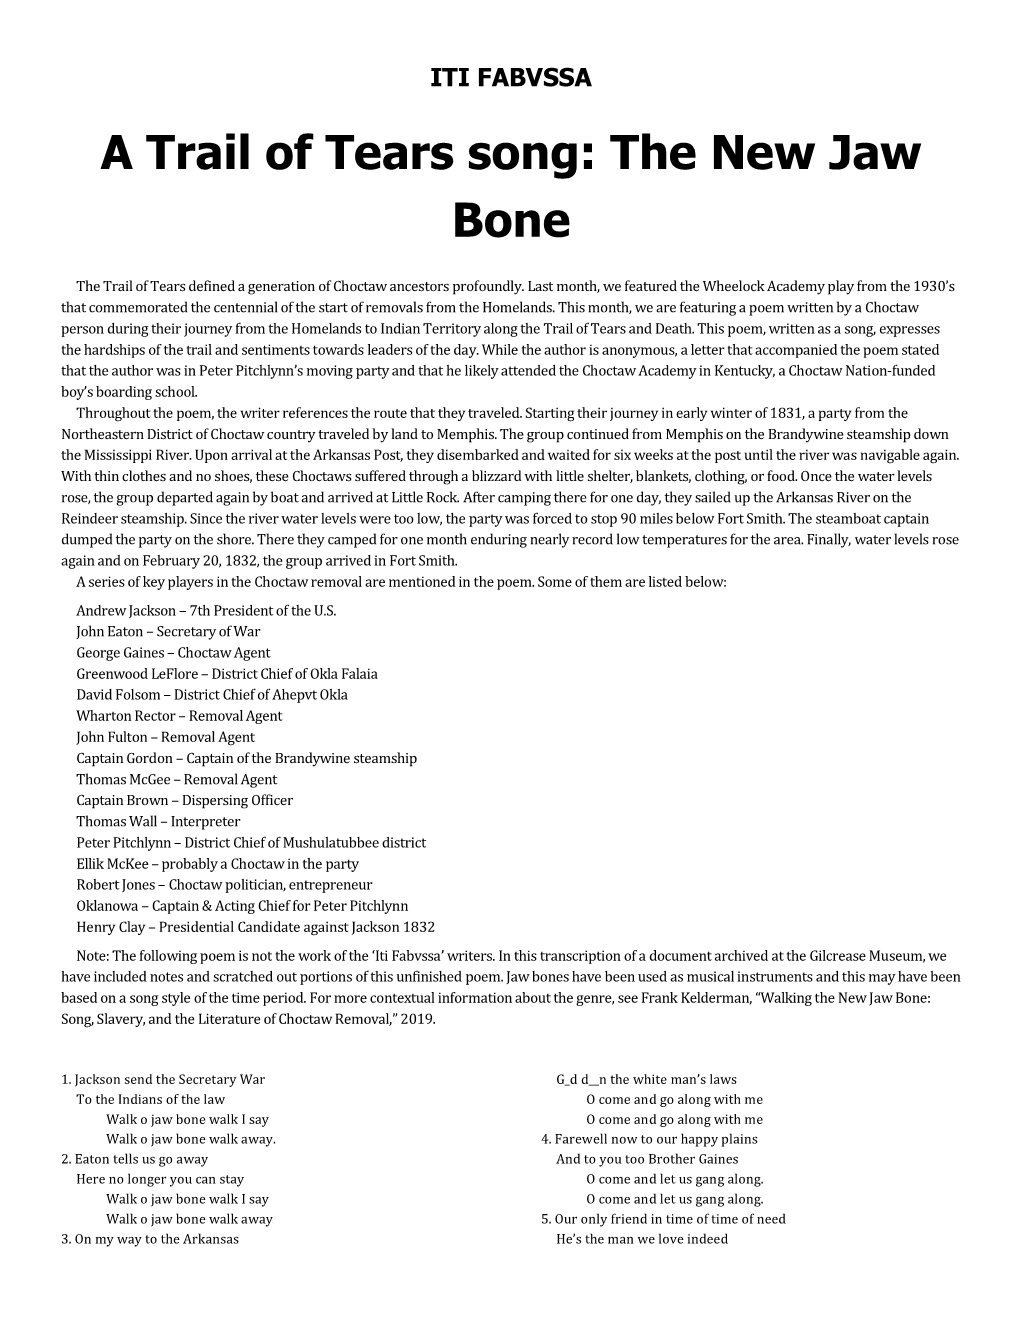 A Trail of Tears Song: the New Jaw Bone